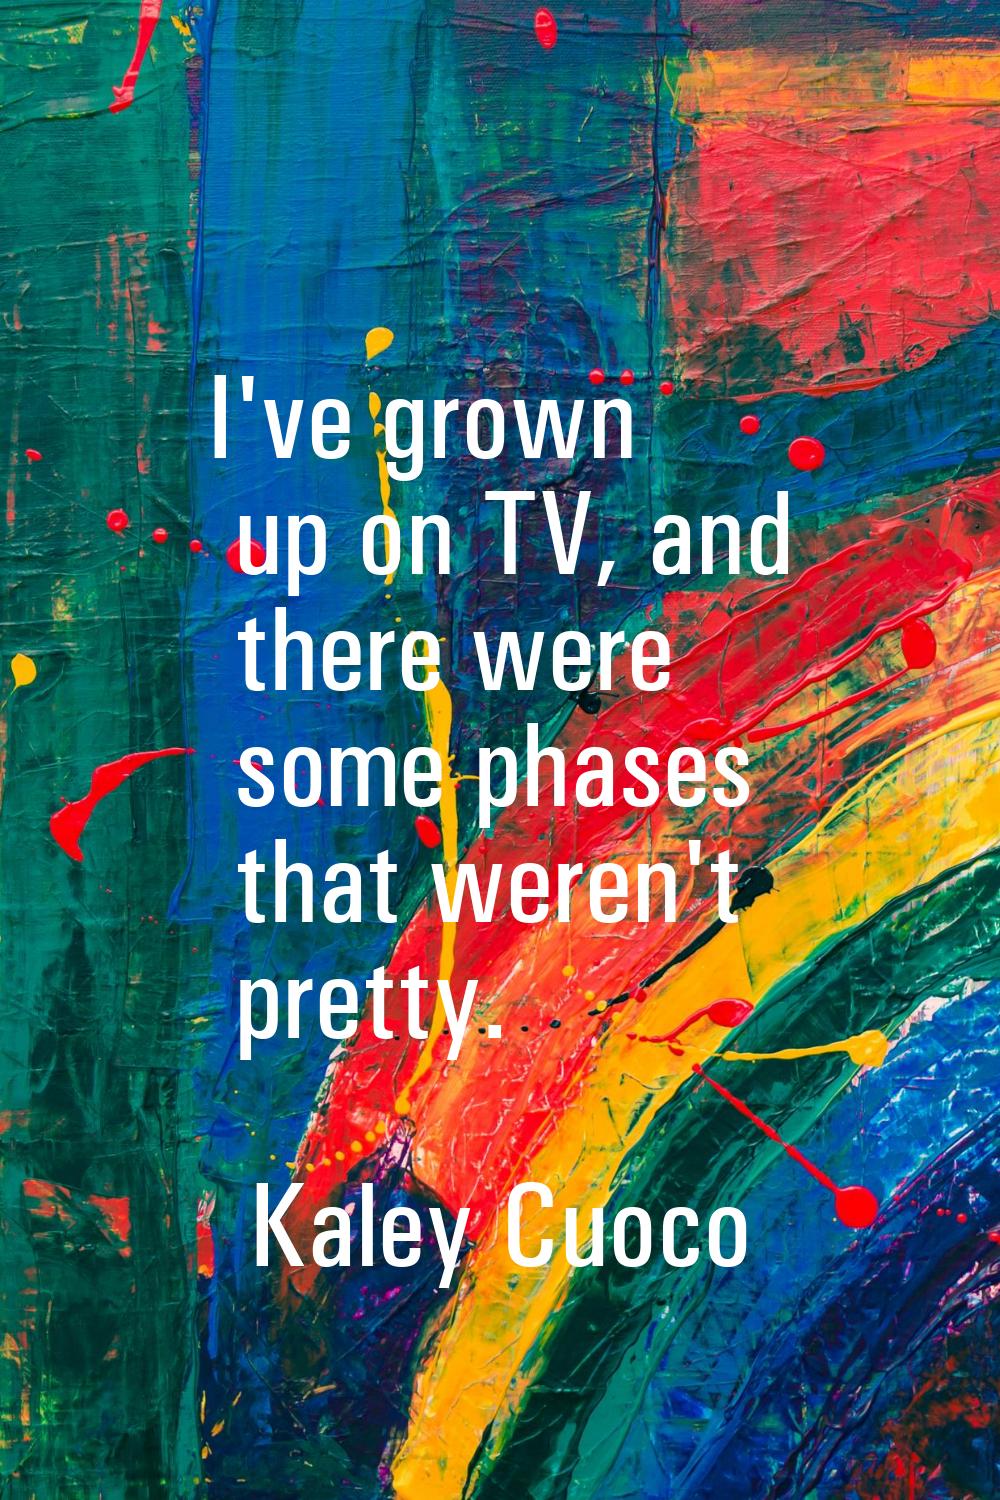 I've grown up on TV, and there were some phases that weren't pretty.